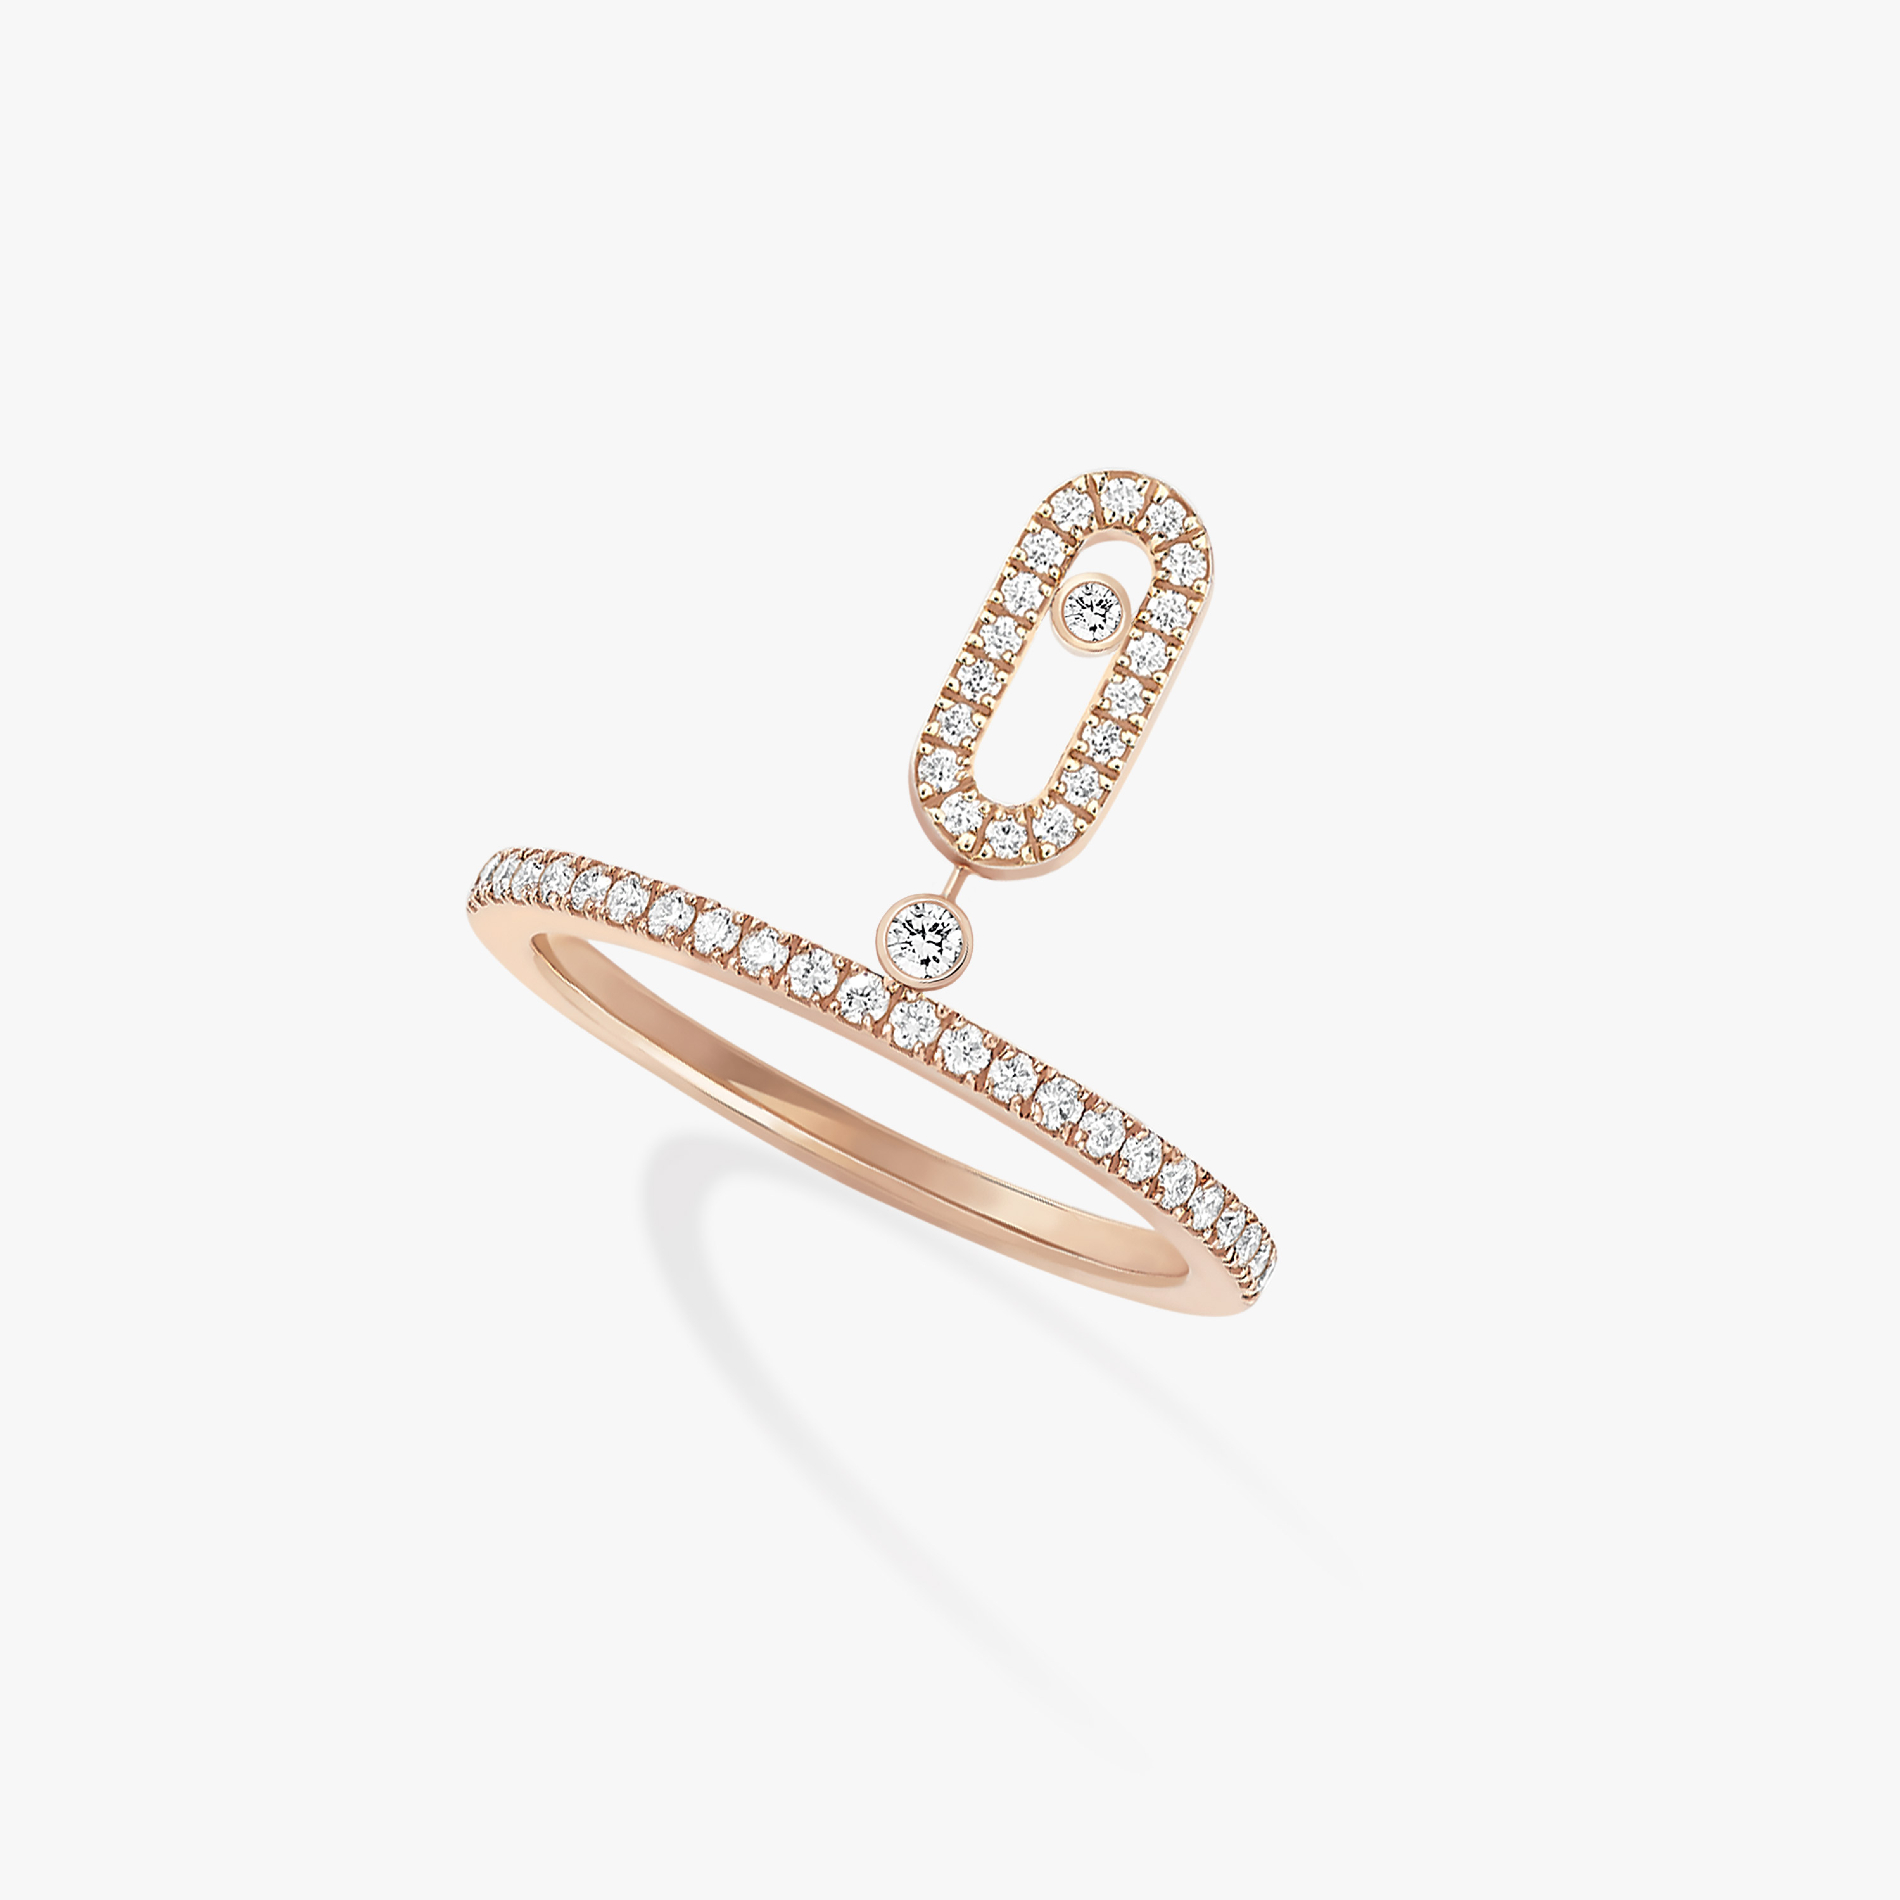 Ring For Her Pink Gold Diamond Move Uno Pavé Drop 11163-PG